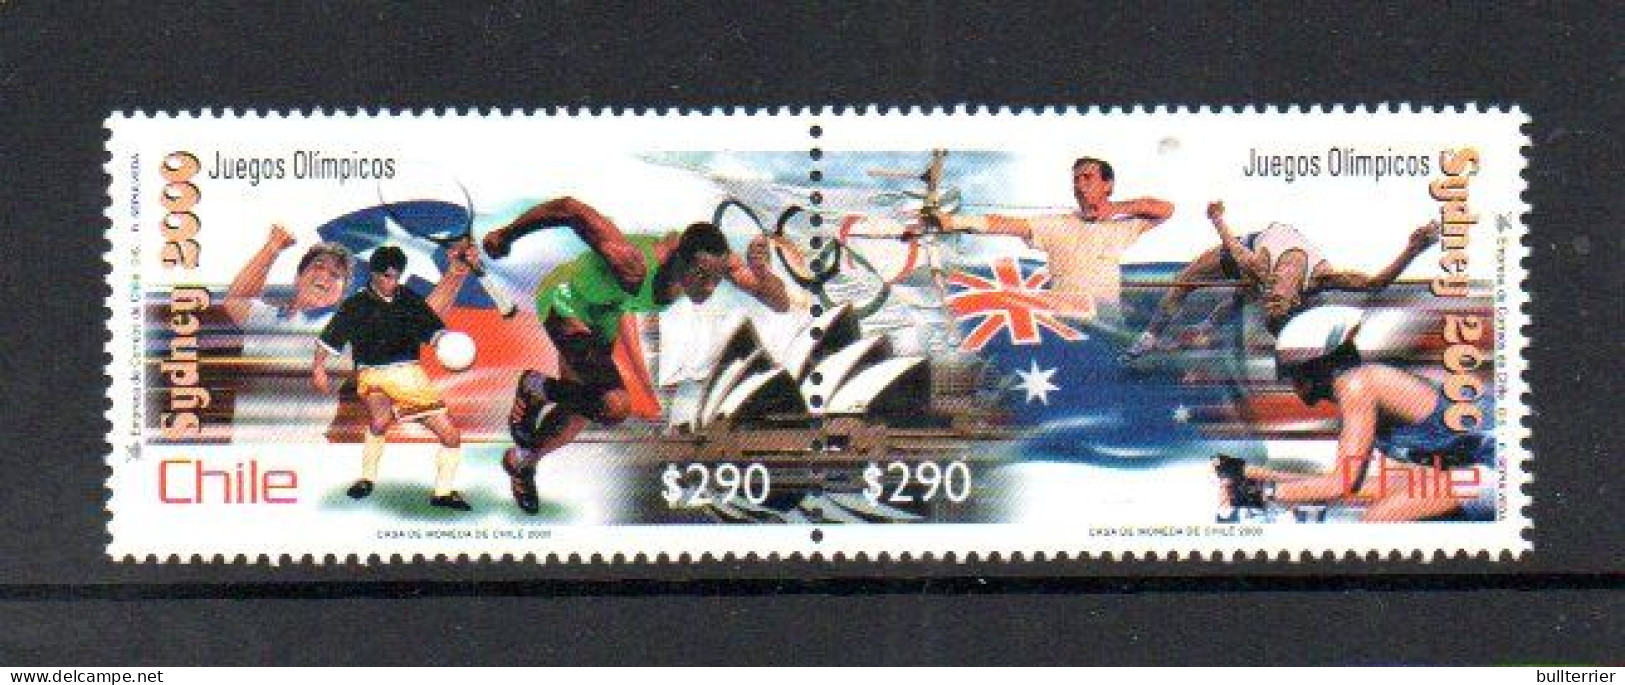 OLYMPICS - CHILE   -  2000 SYDNEY OLYMPICS SET OF 2 IN PAIR   MINT NEVER HINGED - Ete 2000: Sydney